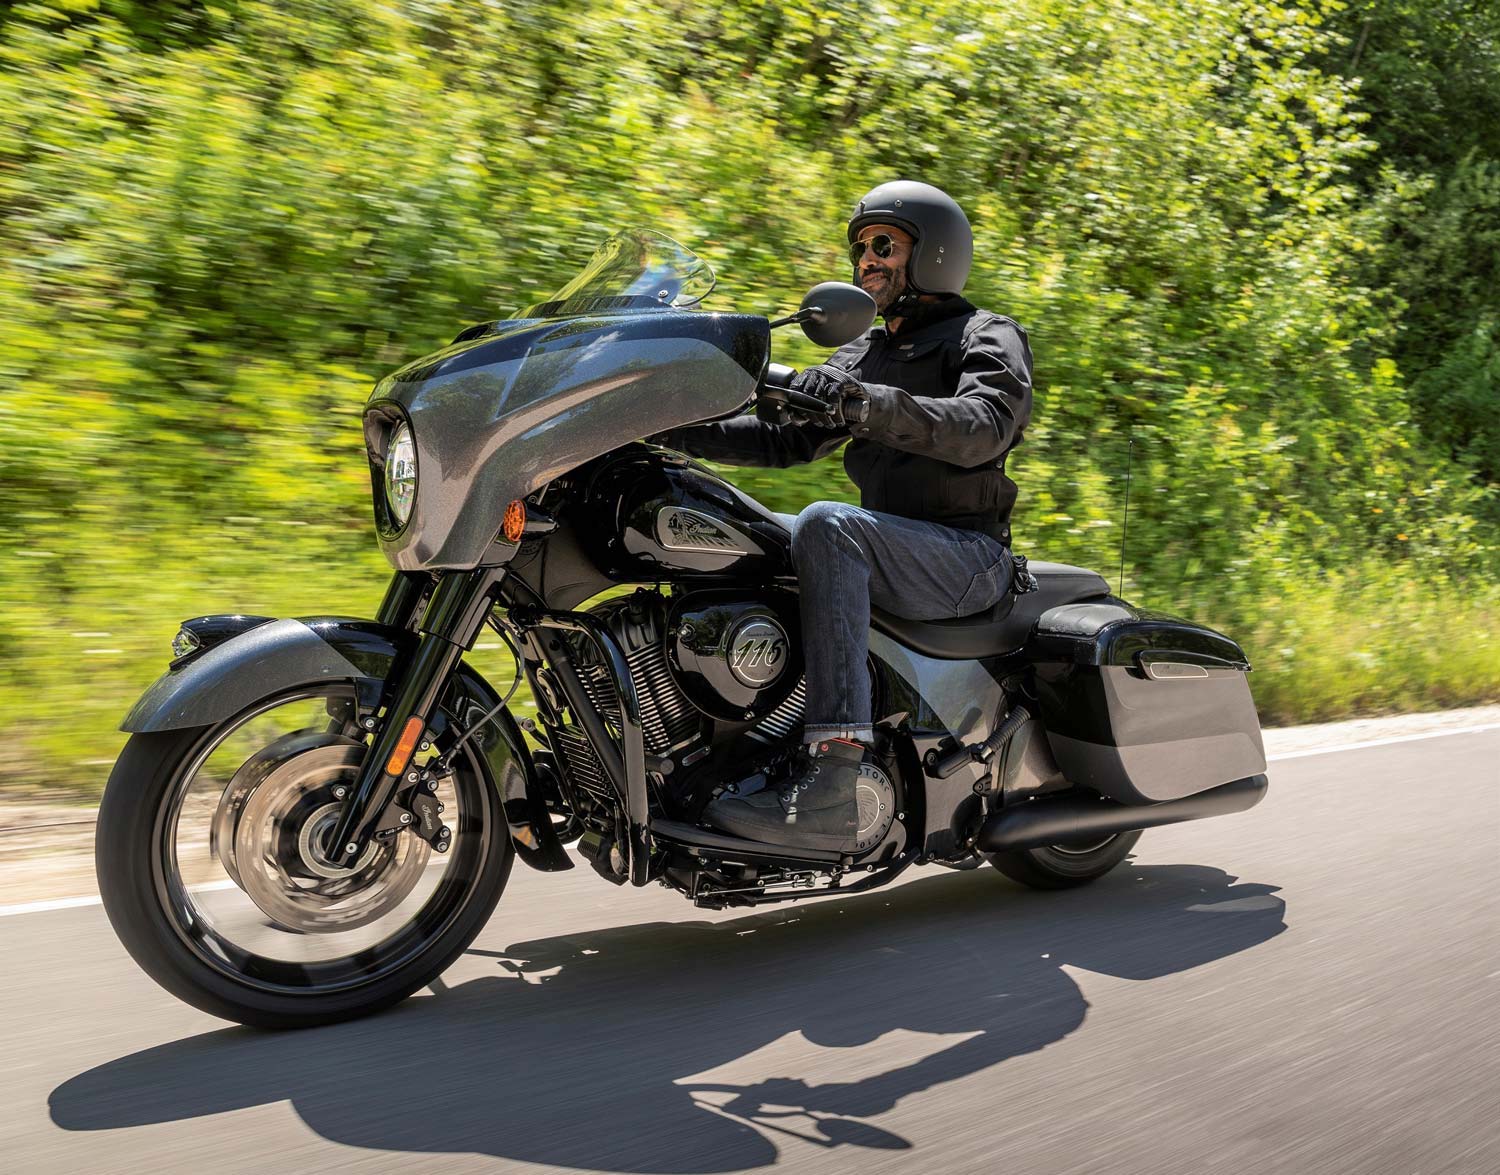 A view of the Indian Chieftain Elite that was released in a limited run of just 154 units back in spring of last year